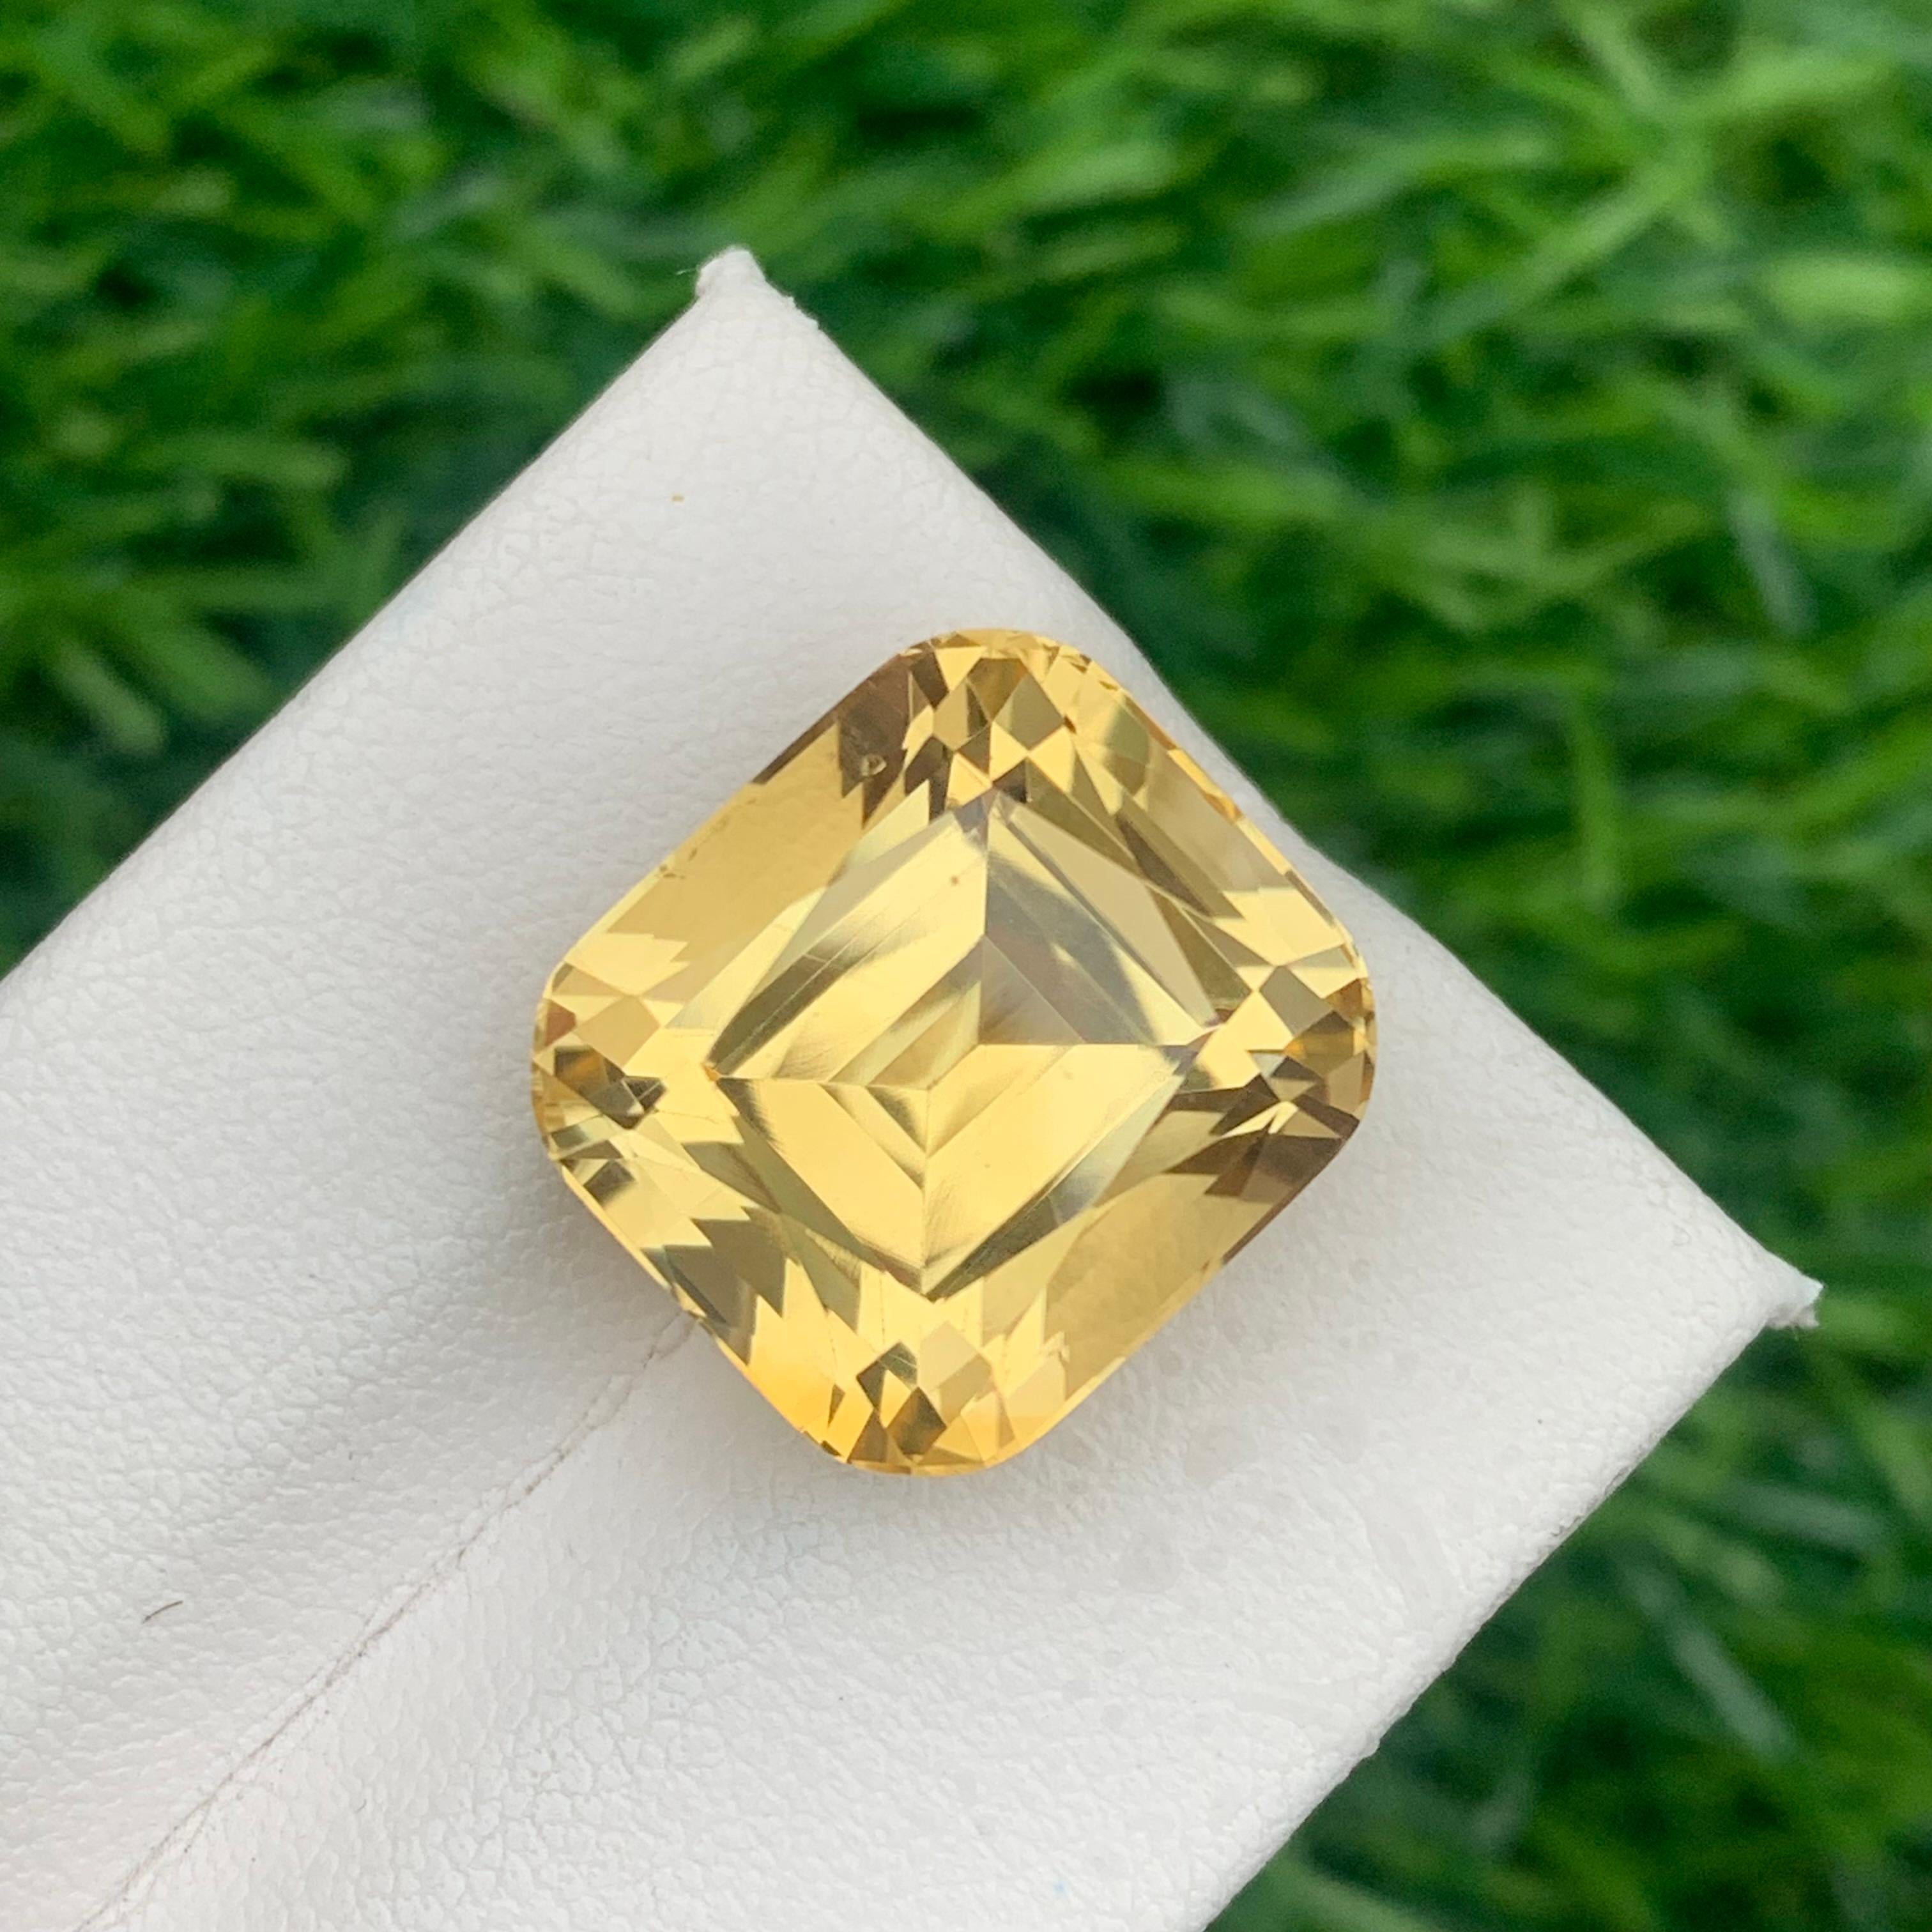 Gemstone Type : Citrine
Weight : 18.70 Carats
Dimensions : 15.7x14.3x12.4 mm
Clarity : Loupe Clean
Origin : Brazil
Color: Yellow
Shape: Cushion
Cut: Cushion
Certificate: On Demand
Month: November
.
The Many Healing Properties of Citrine
Increase